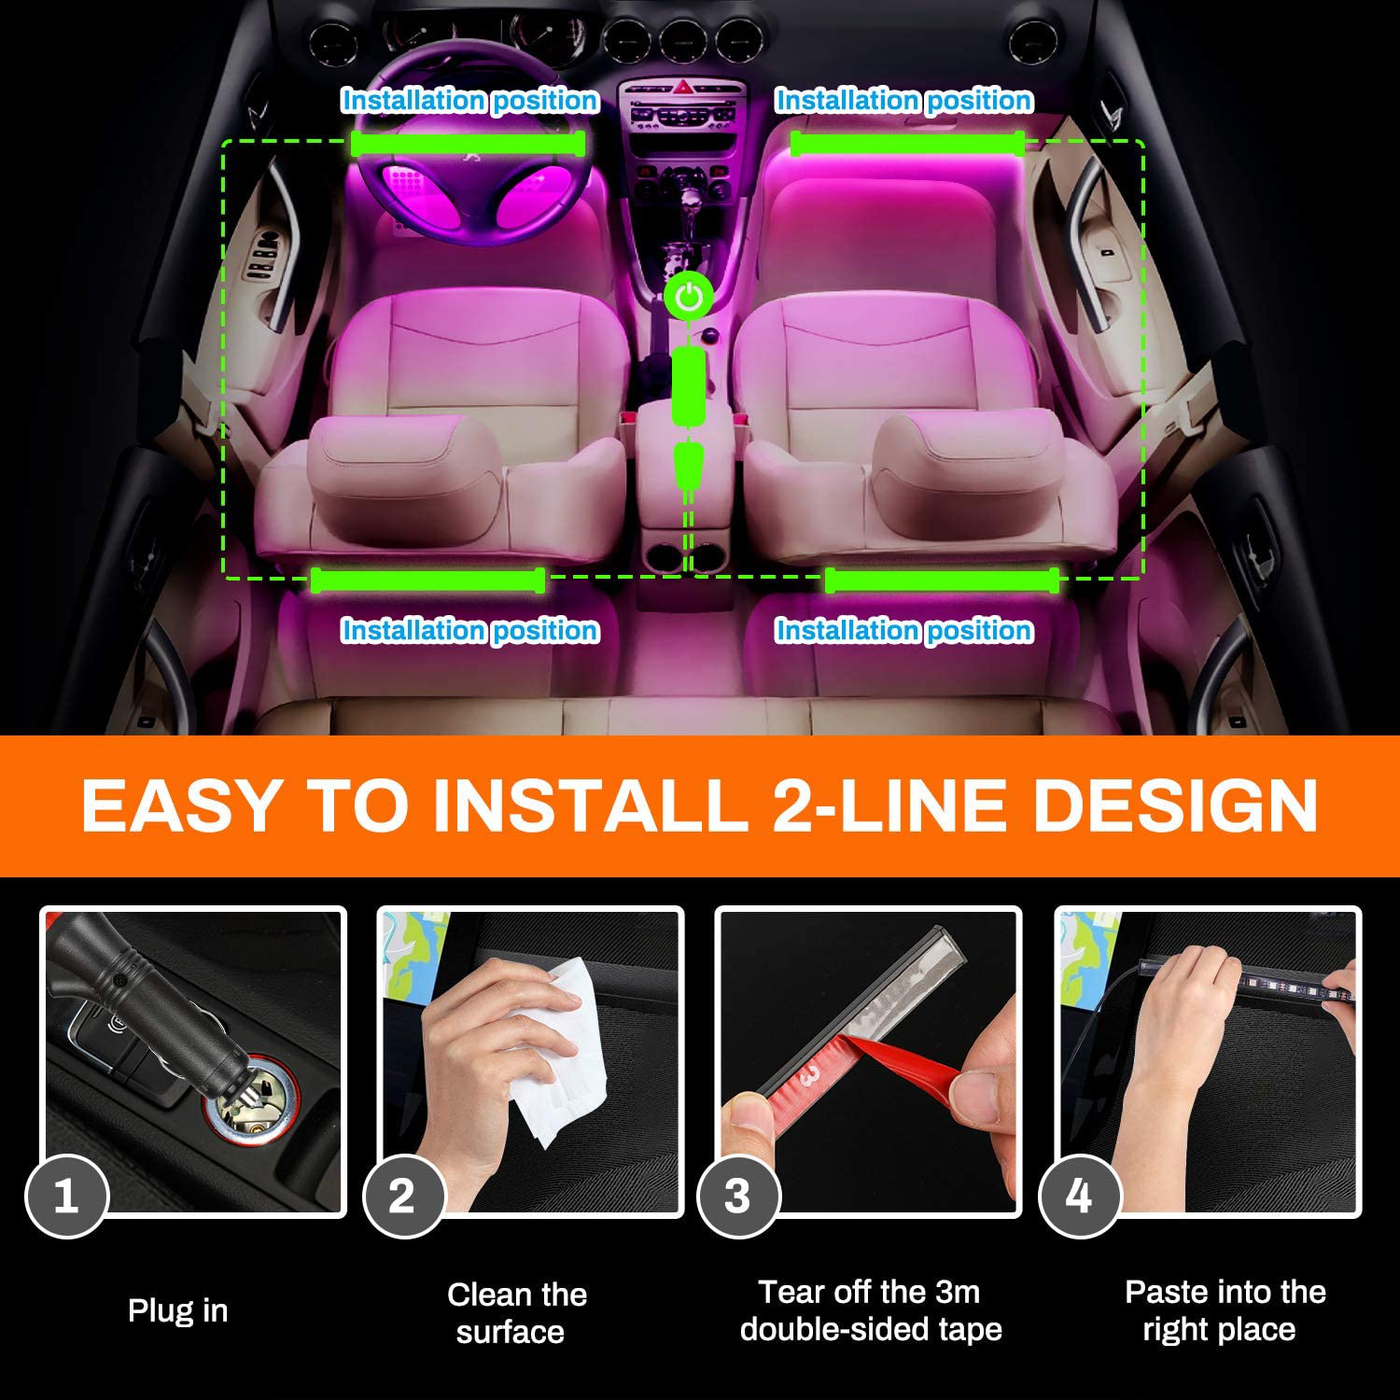 sunva Car LED Strip Light Interior, Sound Active 4 Lines 48 LEDs Multicolor Music Sync Interior Car Lights Under Dash Waterproof led Lights for car, Wireless Remote Control, with Car Charger,DC 12V